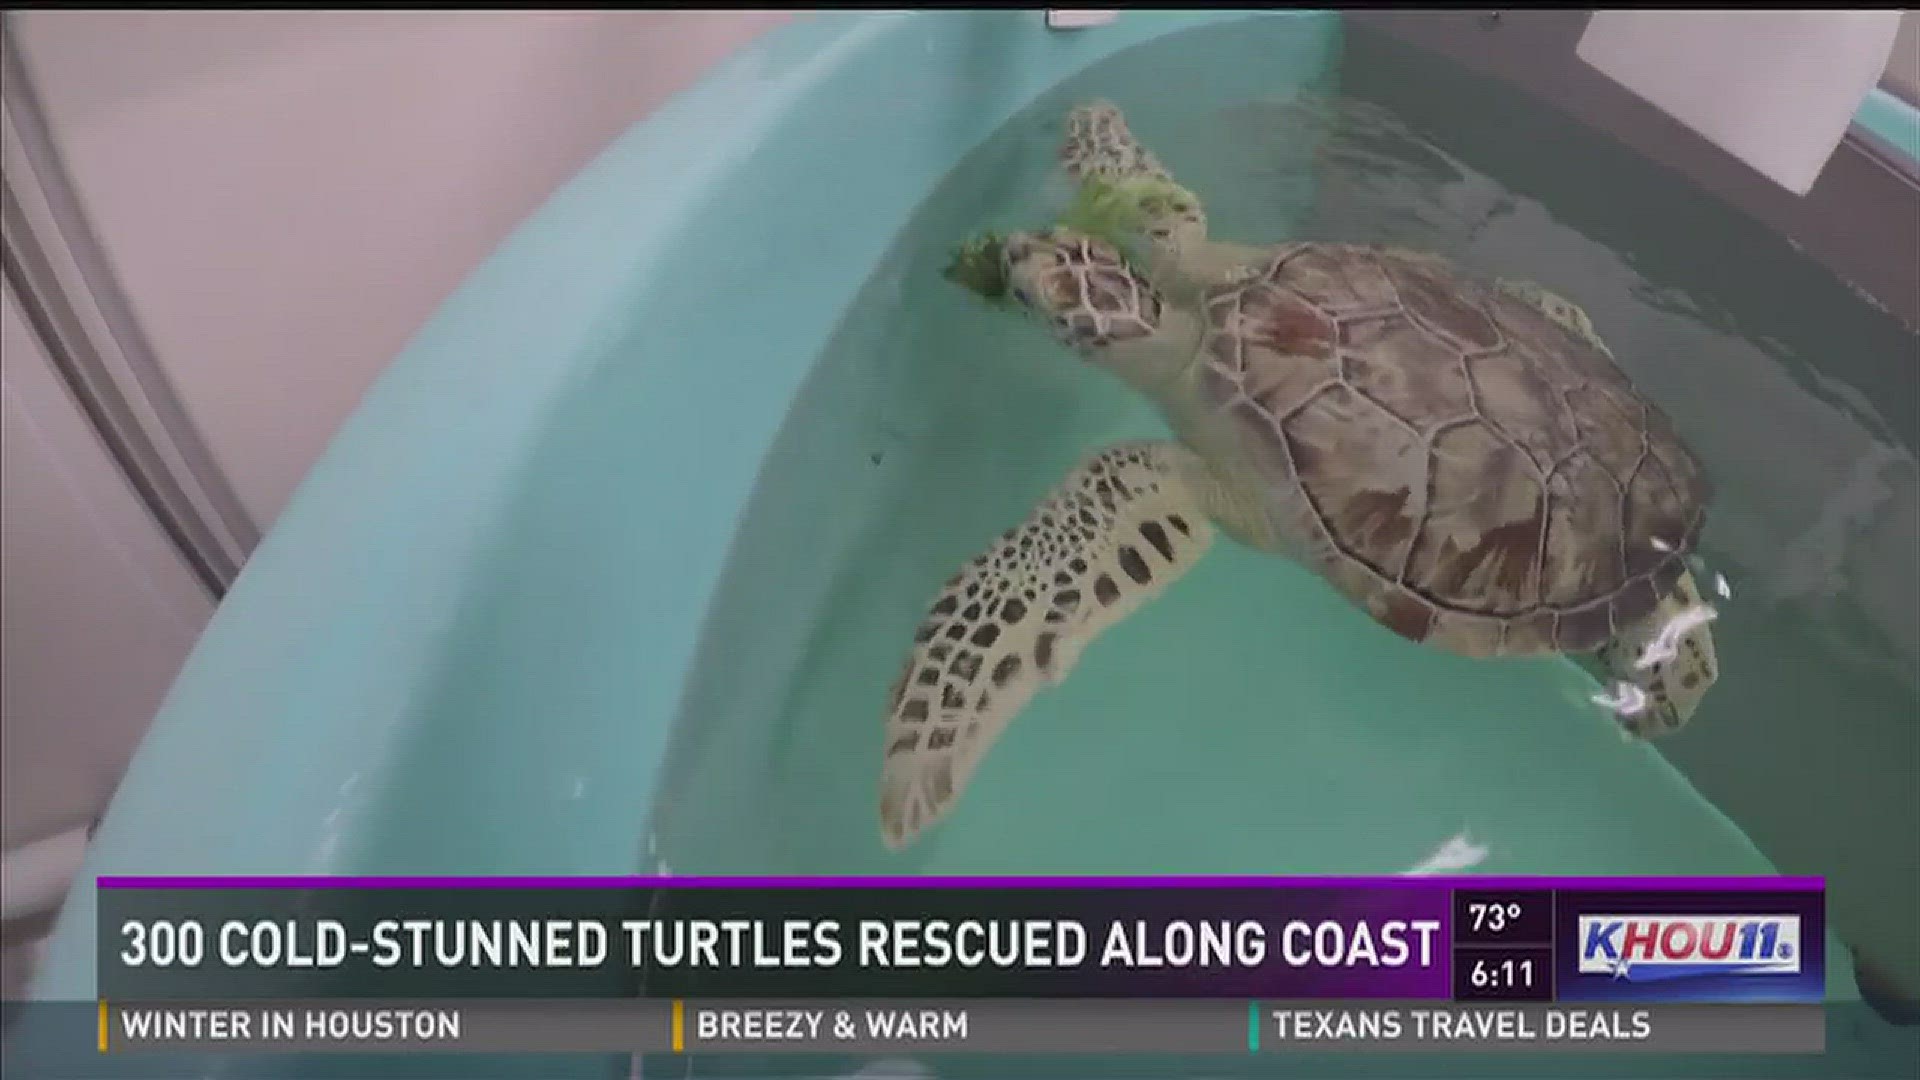 Three hundred sea turtles along the Gulf coast were rescued after being stunned from the freezing temperatures last week.